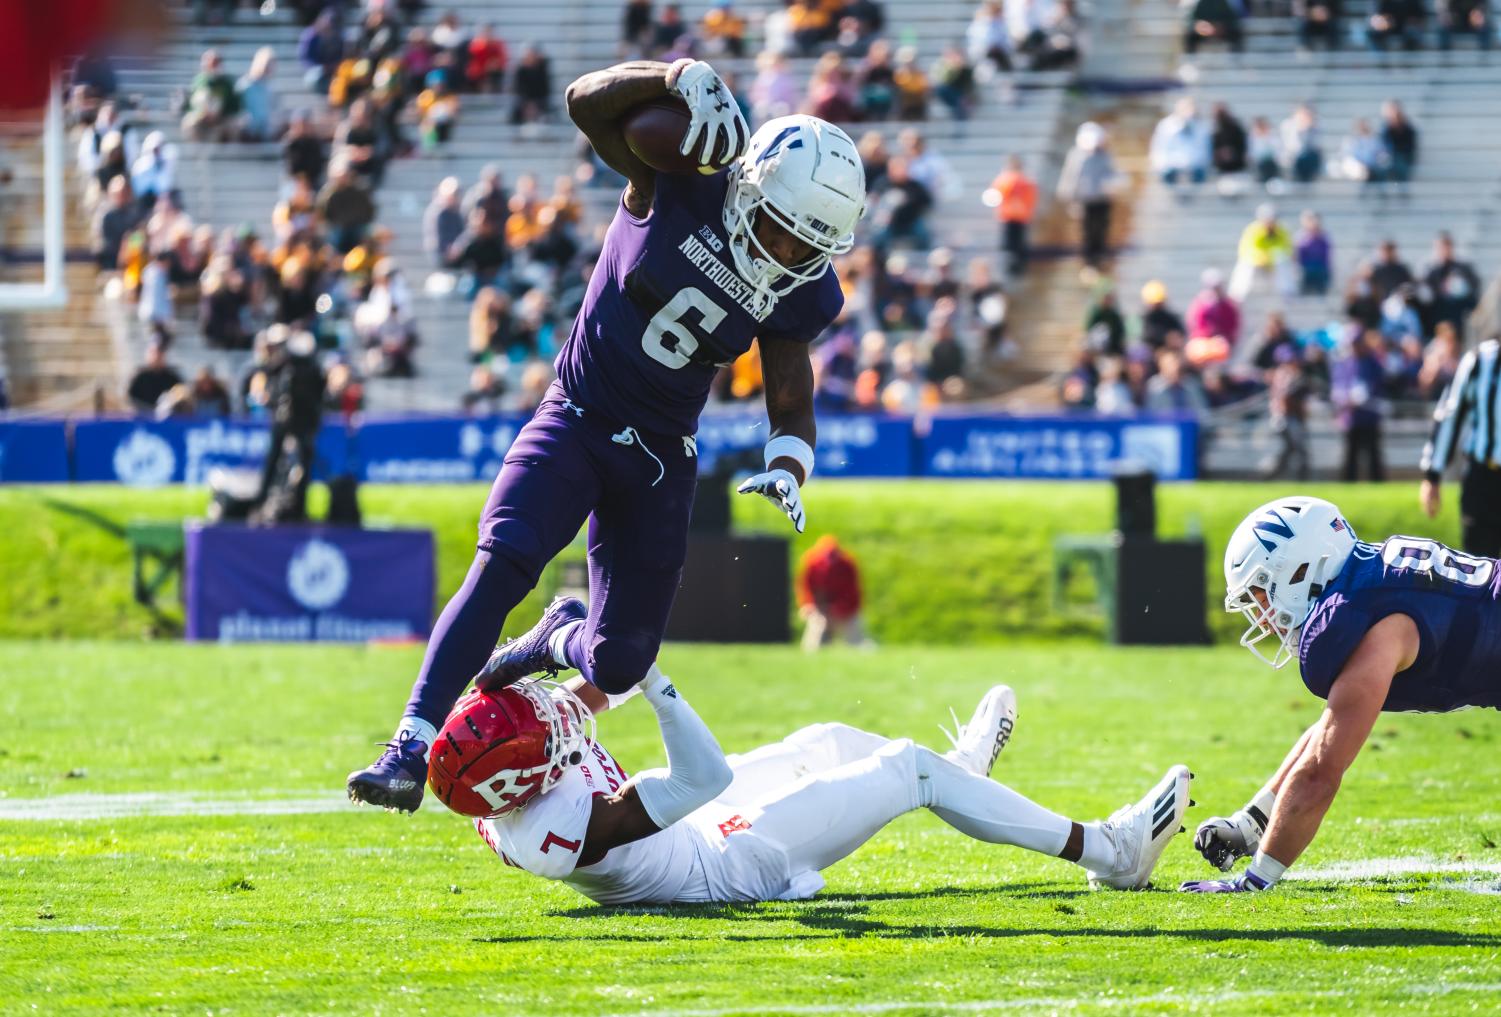 Northwestern football’s passing game excels against Rutgers